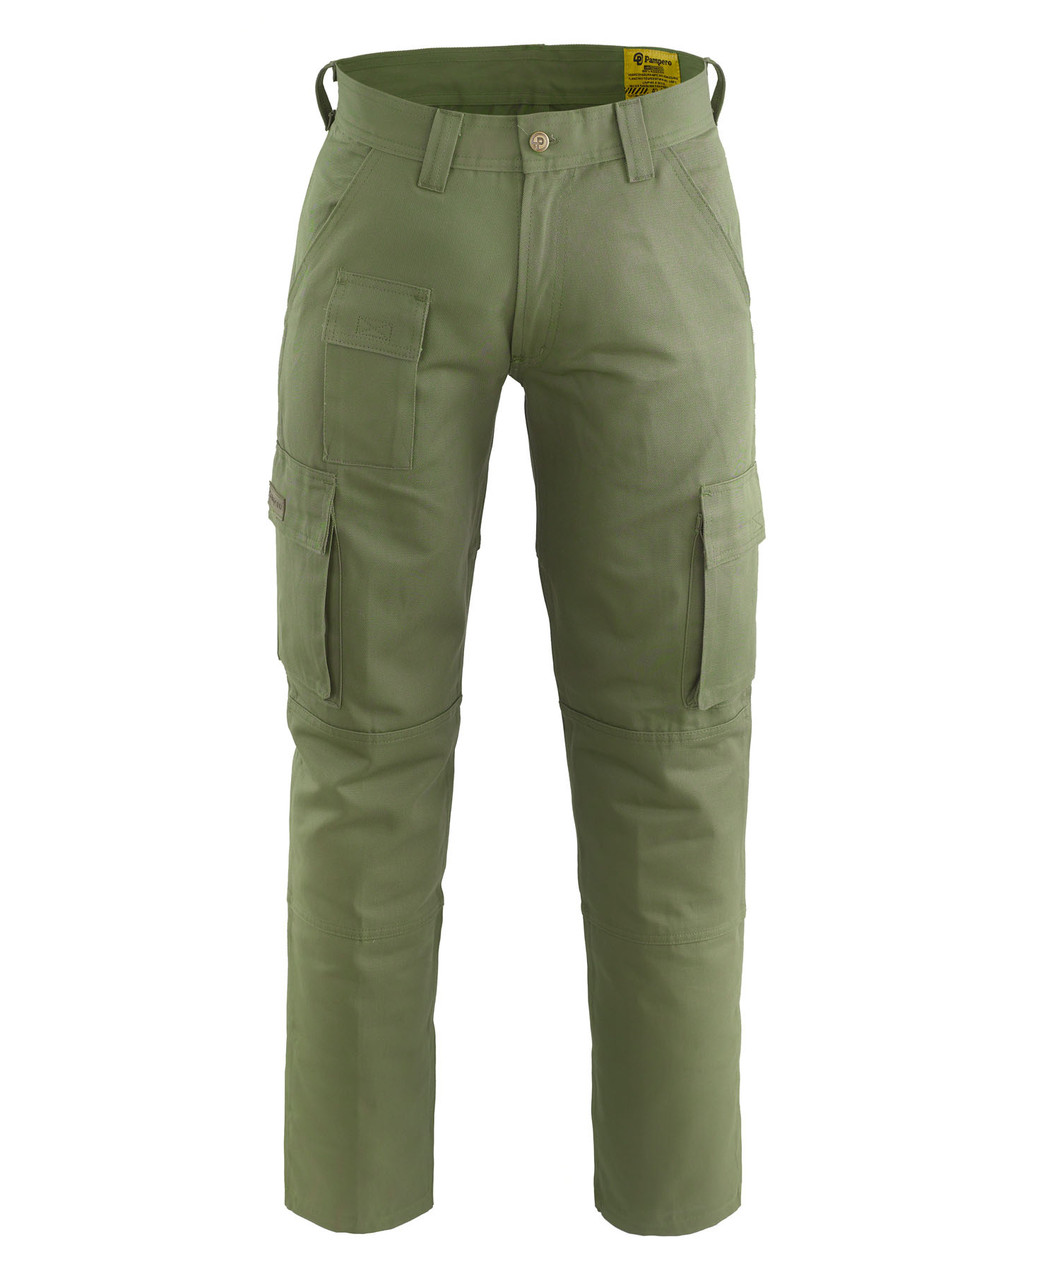 Pampero Pantalón Cargo Antidesgarro Ripstop Cargo Pants Relaxed Fit  Straight Leg Cargo Pants - (Various Sizes & Colors Available)